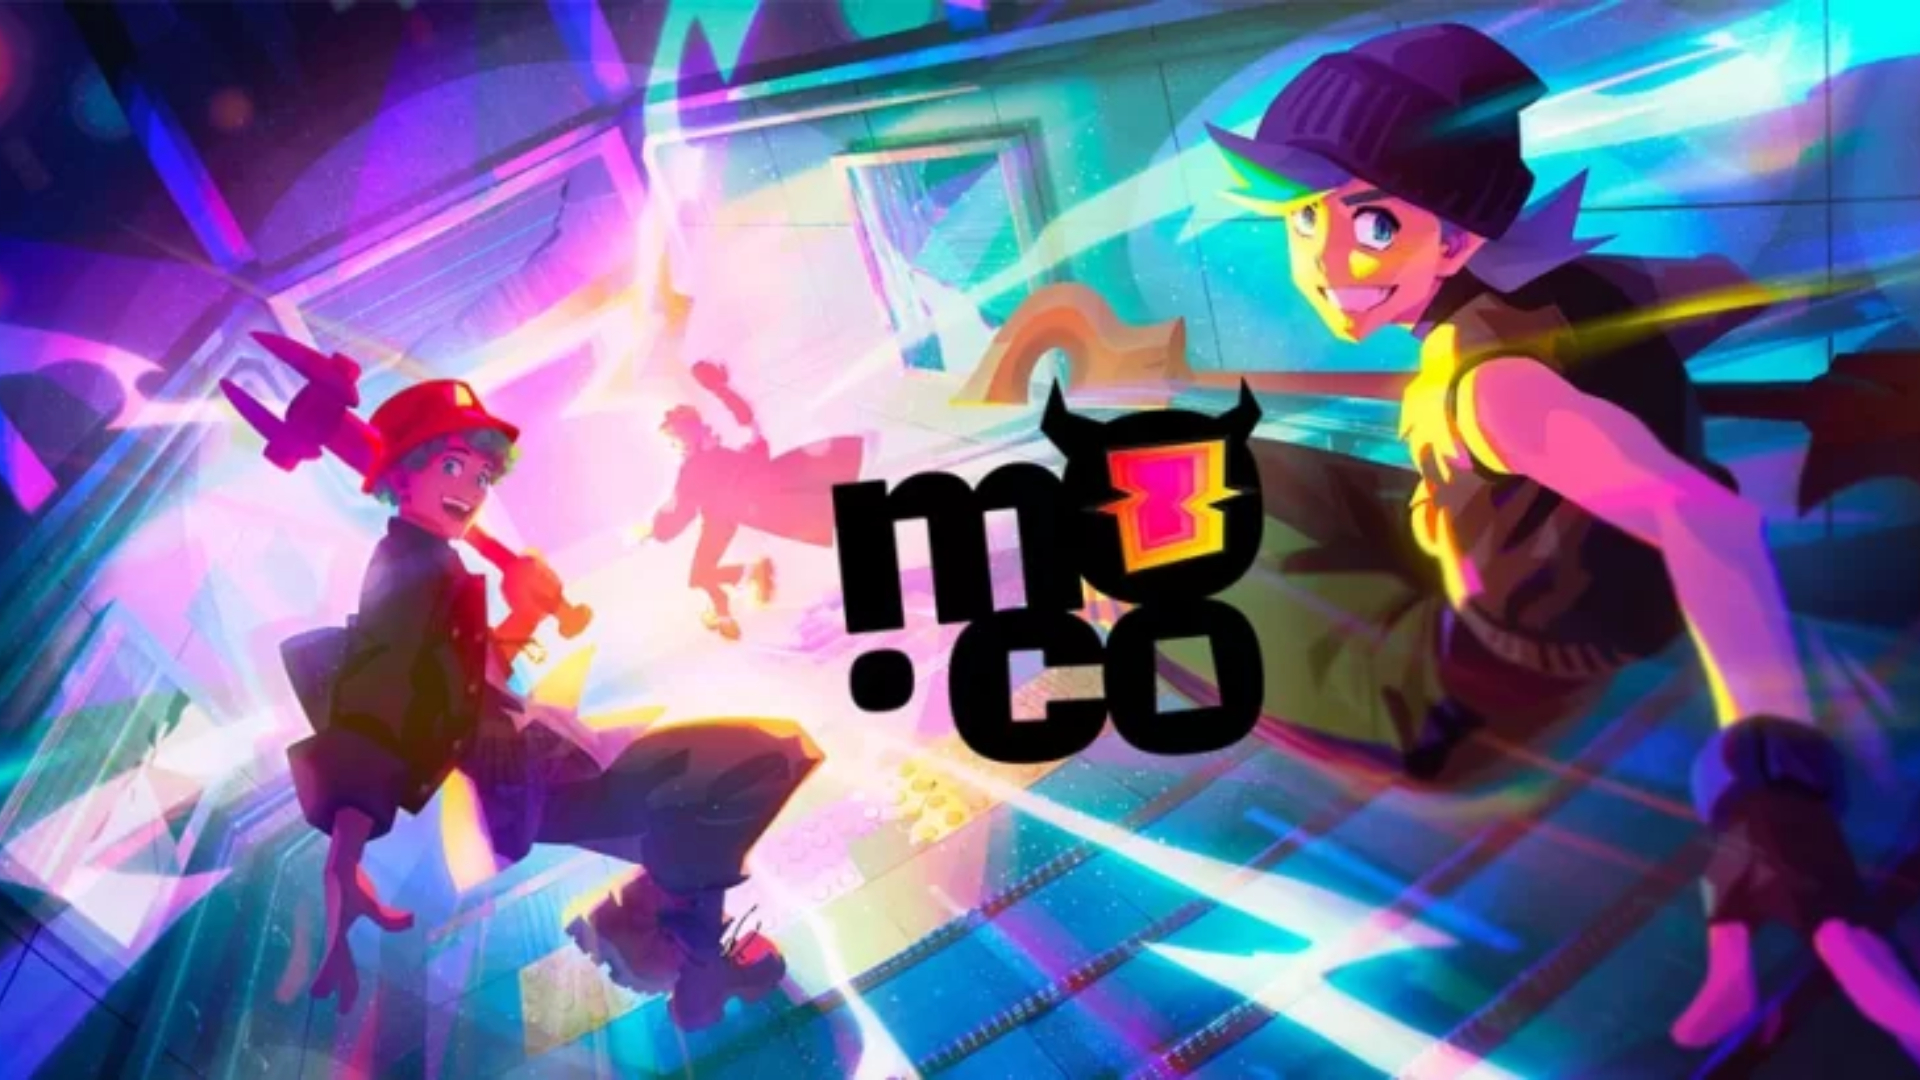 Supercell's Mo.co Launches New Updates with Exciting Features